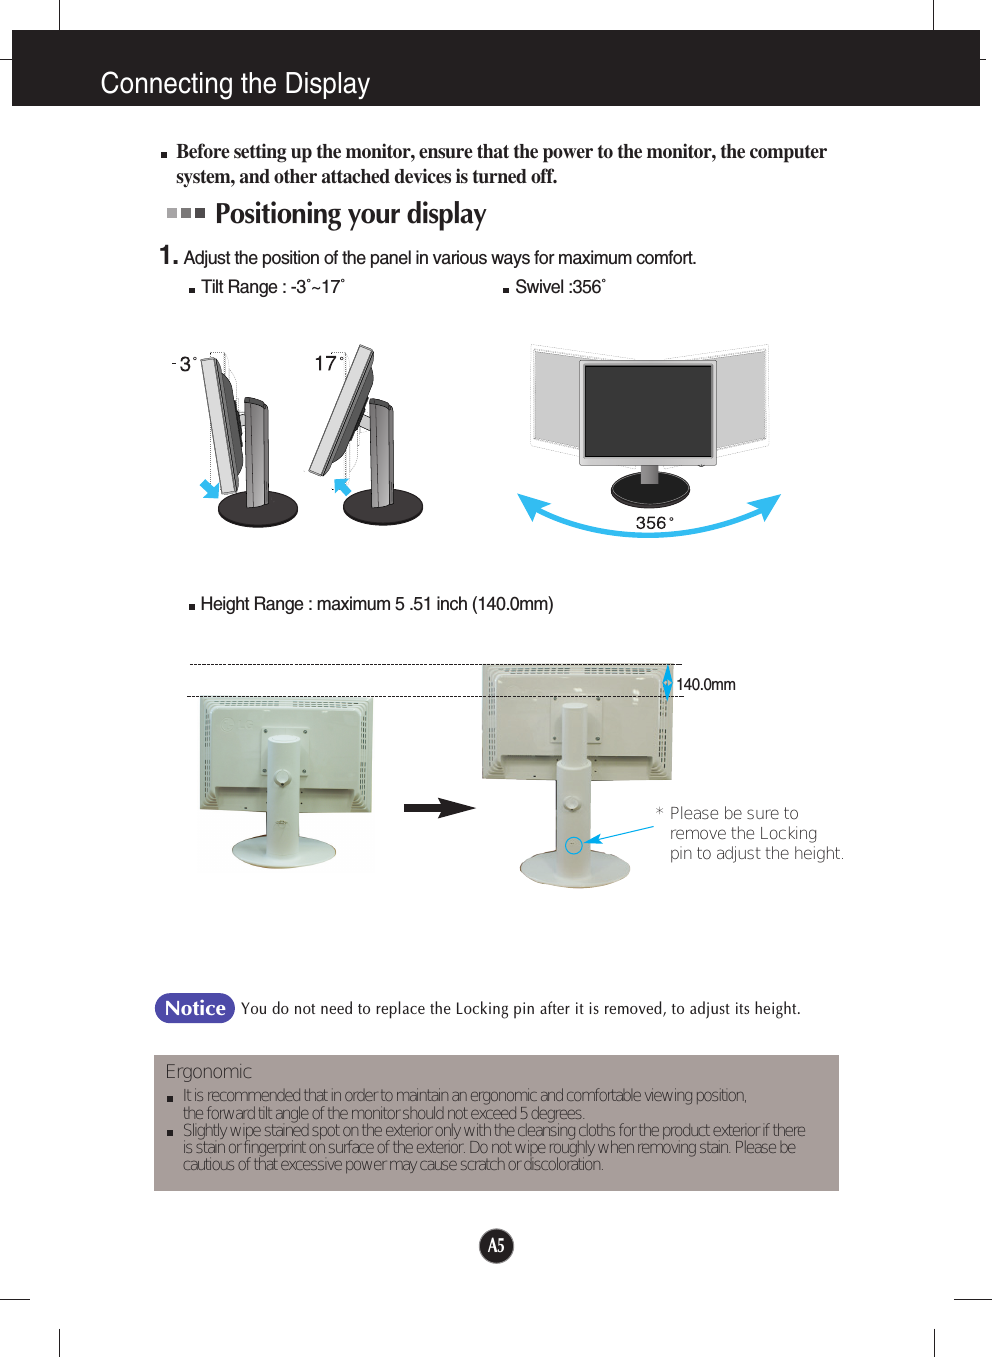 A5Connecting the DisplayBefore setting up the monitor, ensure that the power to the monitor, the computersystem, and other attached devices is turned off. Positioning your display1. Adjust the position of the panel in various ways for maximum comfort.Tilt Range : -3˚~17˚                                    Swivel :356˚ErgonomicIt is recommended that in order to maintain an ergonomic and comfortable viewing position, the forward tilt angle of the monitor should not exceed 5 degrees.Slightly wipe stained spot on the exterior only with the cleansing cloths for the product exterior if there is stain or fingerprint on surface of the exterior. Do not wipe roughly when removing stain. Please be cautious of that excessive power may cause scratch or discoloration. Height Range : maximum 5 .51 inch (140.0mm)You do not need to replace the Locking pin after it is removed, to adjust its height. Notice140.0mm* Please be sure to       remove the Locking pin to adjust the height.   